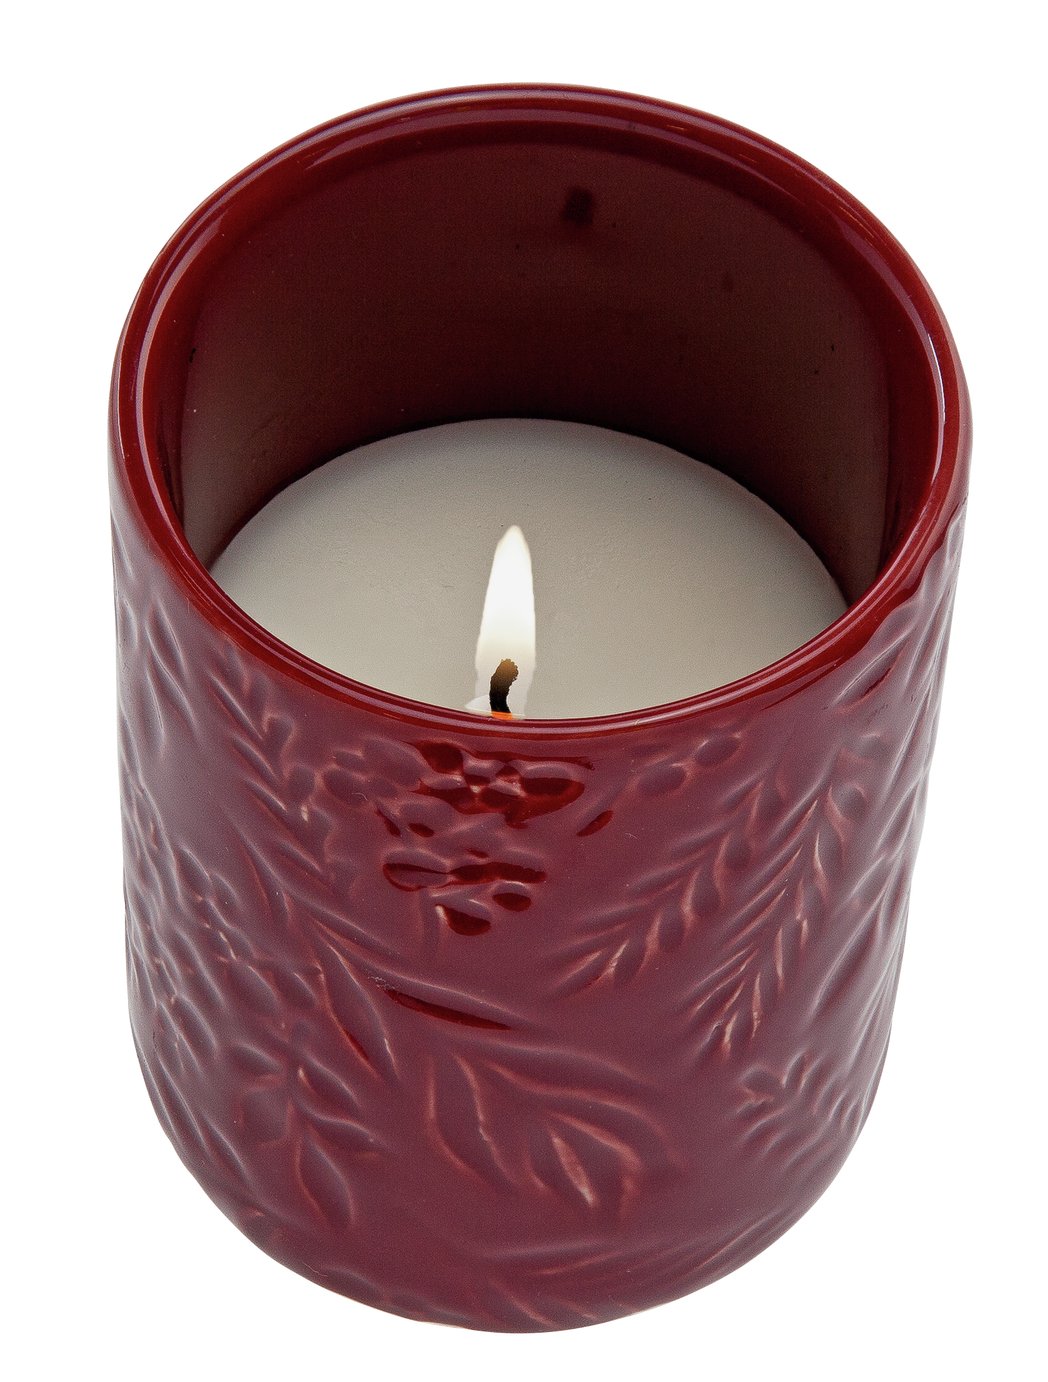 Sainsbury's Home Christmas Spice Small Candle Reviews